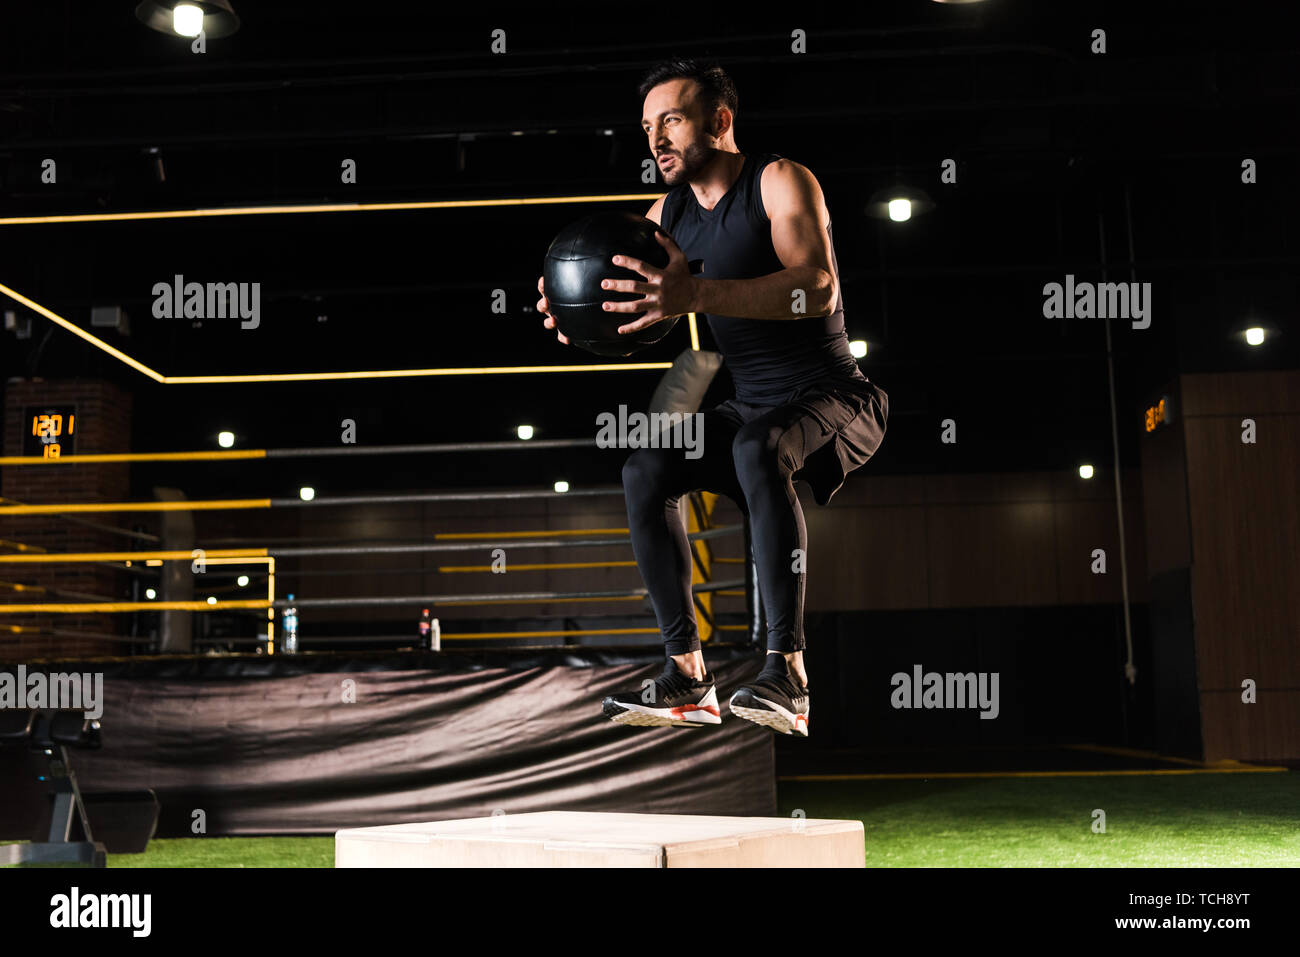 low angle view of serious man jumping on squat box while holding ball Stock Photo